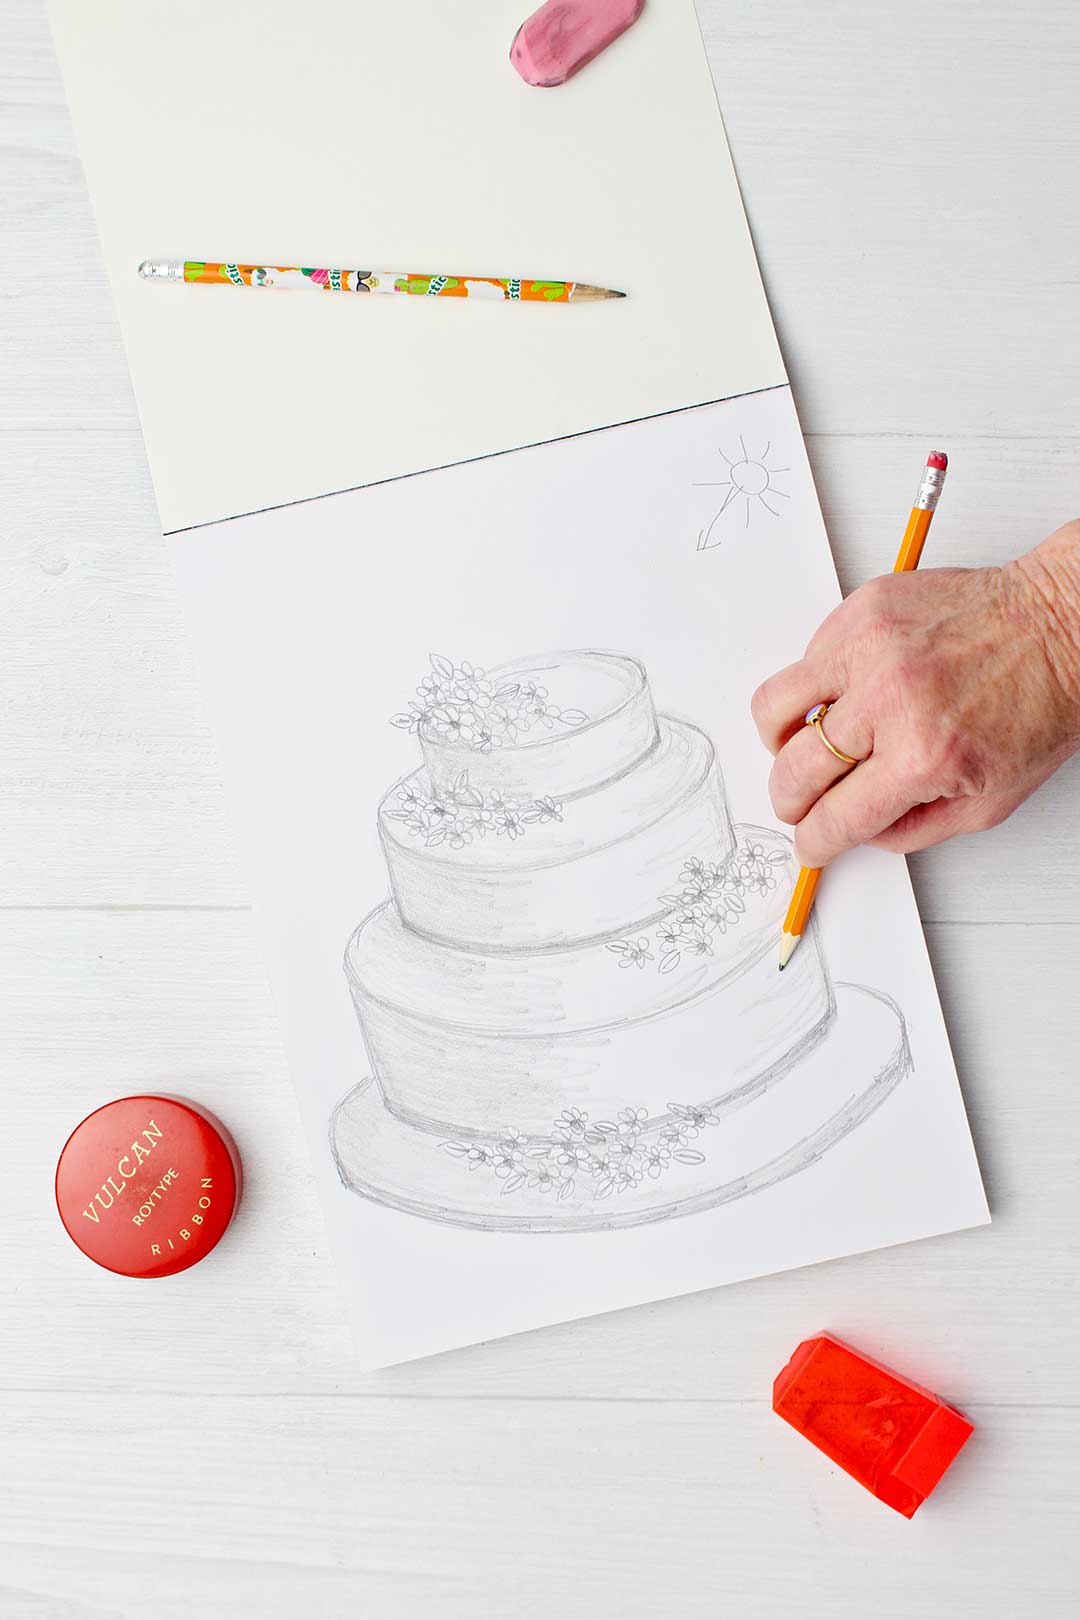 Hand sketching some shadowing on right side of third tier of wedding cake.